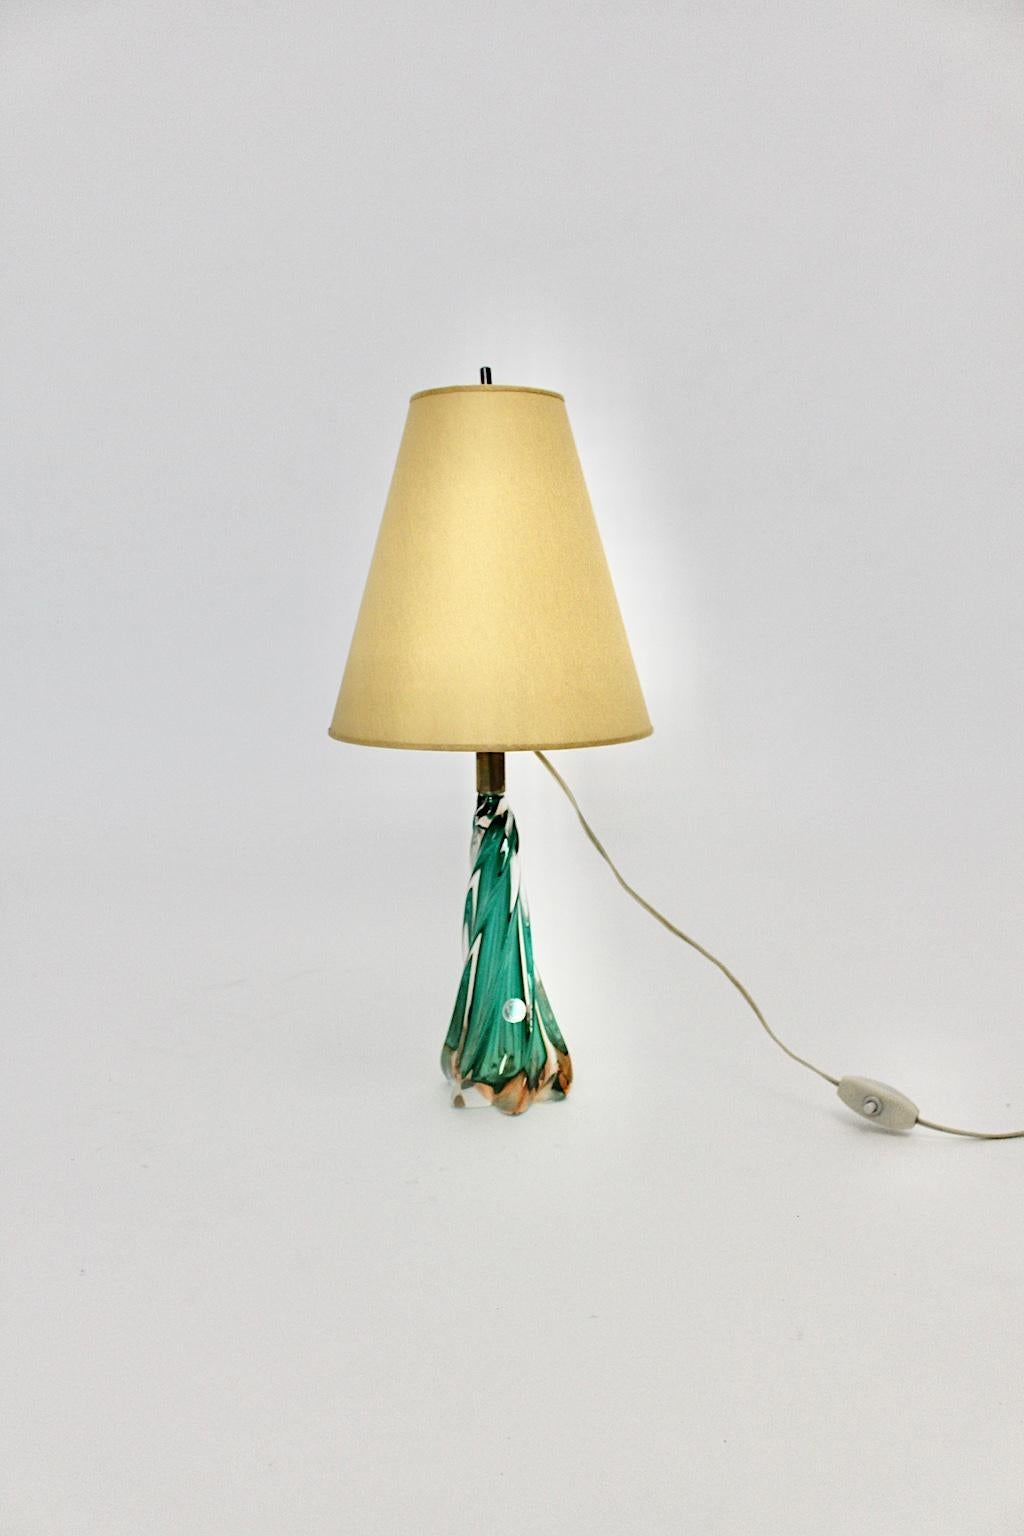 Blown Glass Mid-Century Modern Vintage Glass Green Gold Table Lamp, 1950s, Italy For Sale